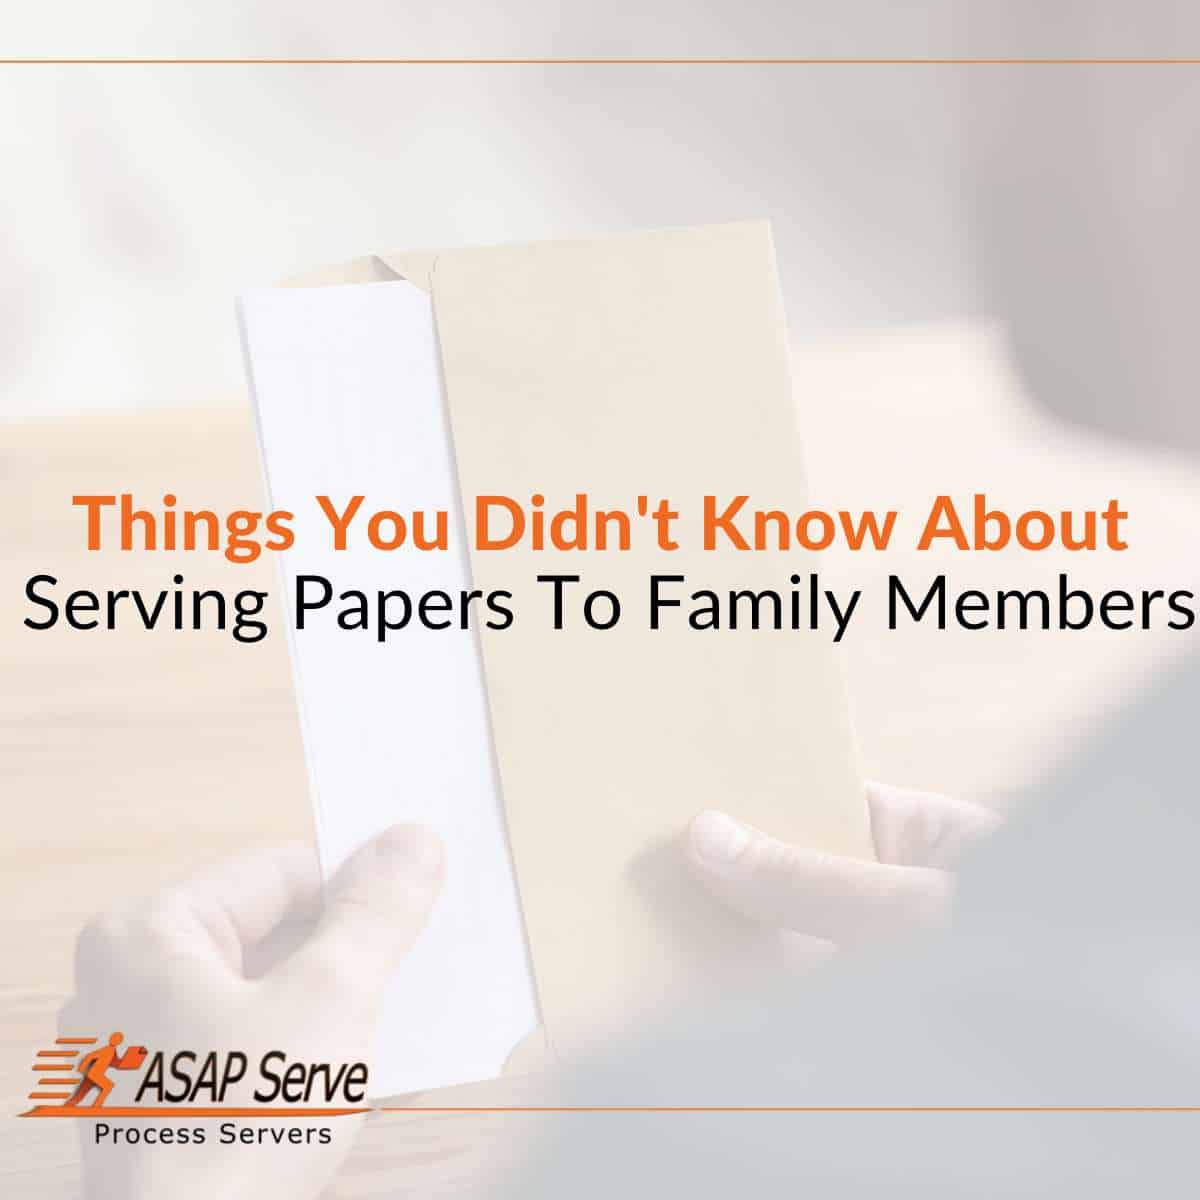 Things You Didn't Know About Serving Papers To Family Members